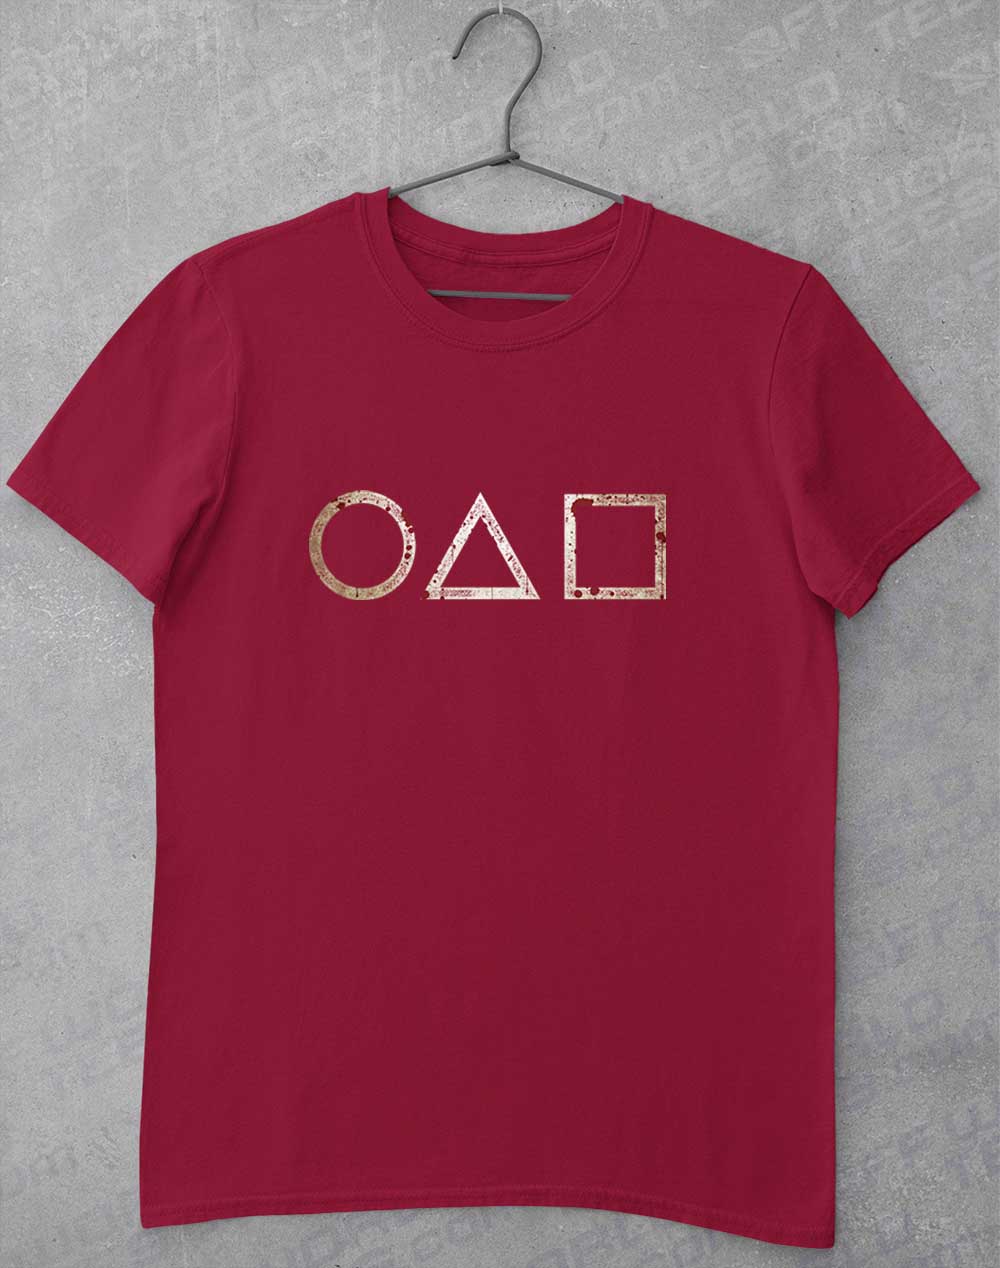 Cardinal Red - Circle Triangle Square T-Shirt